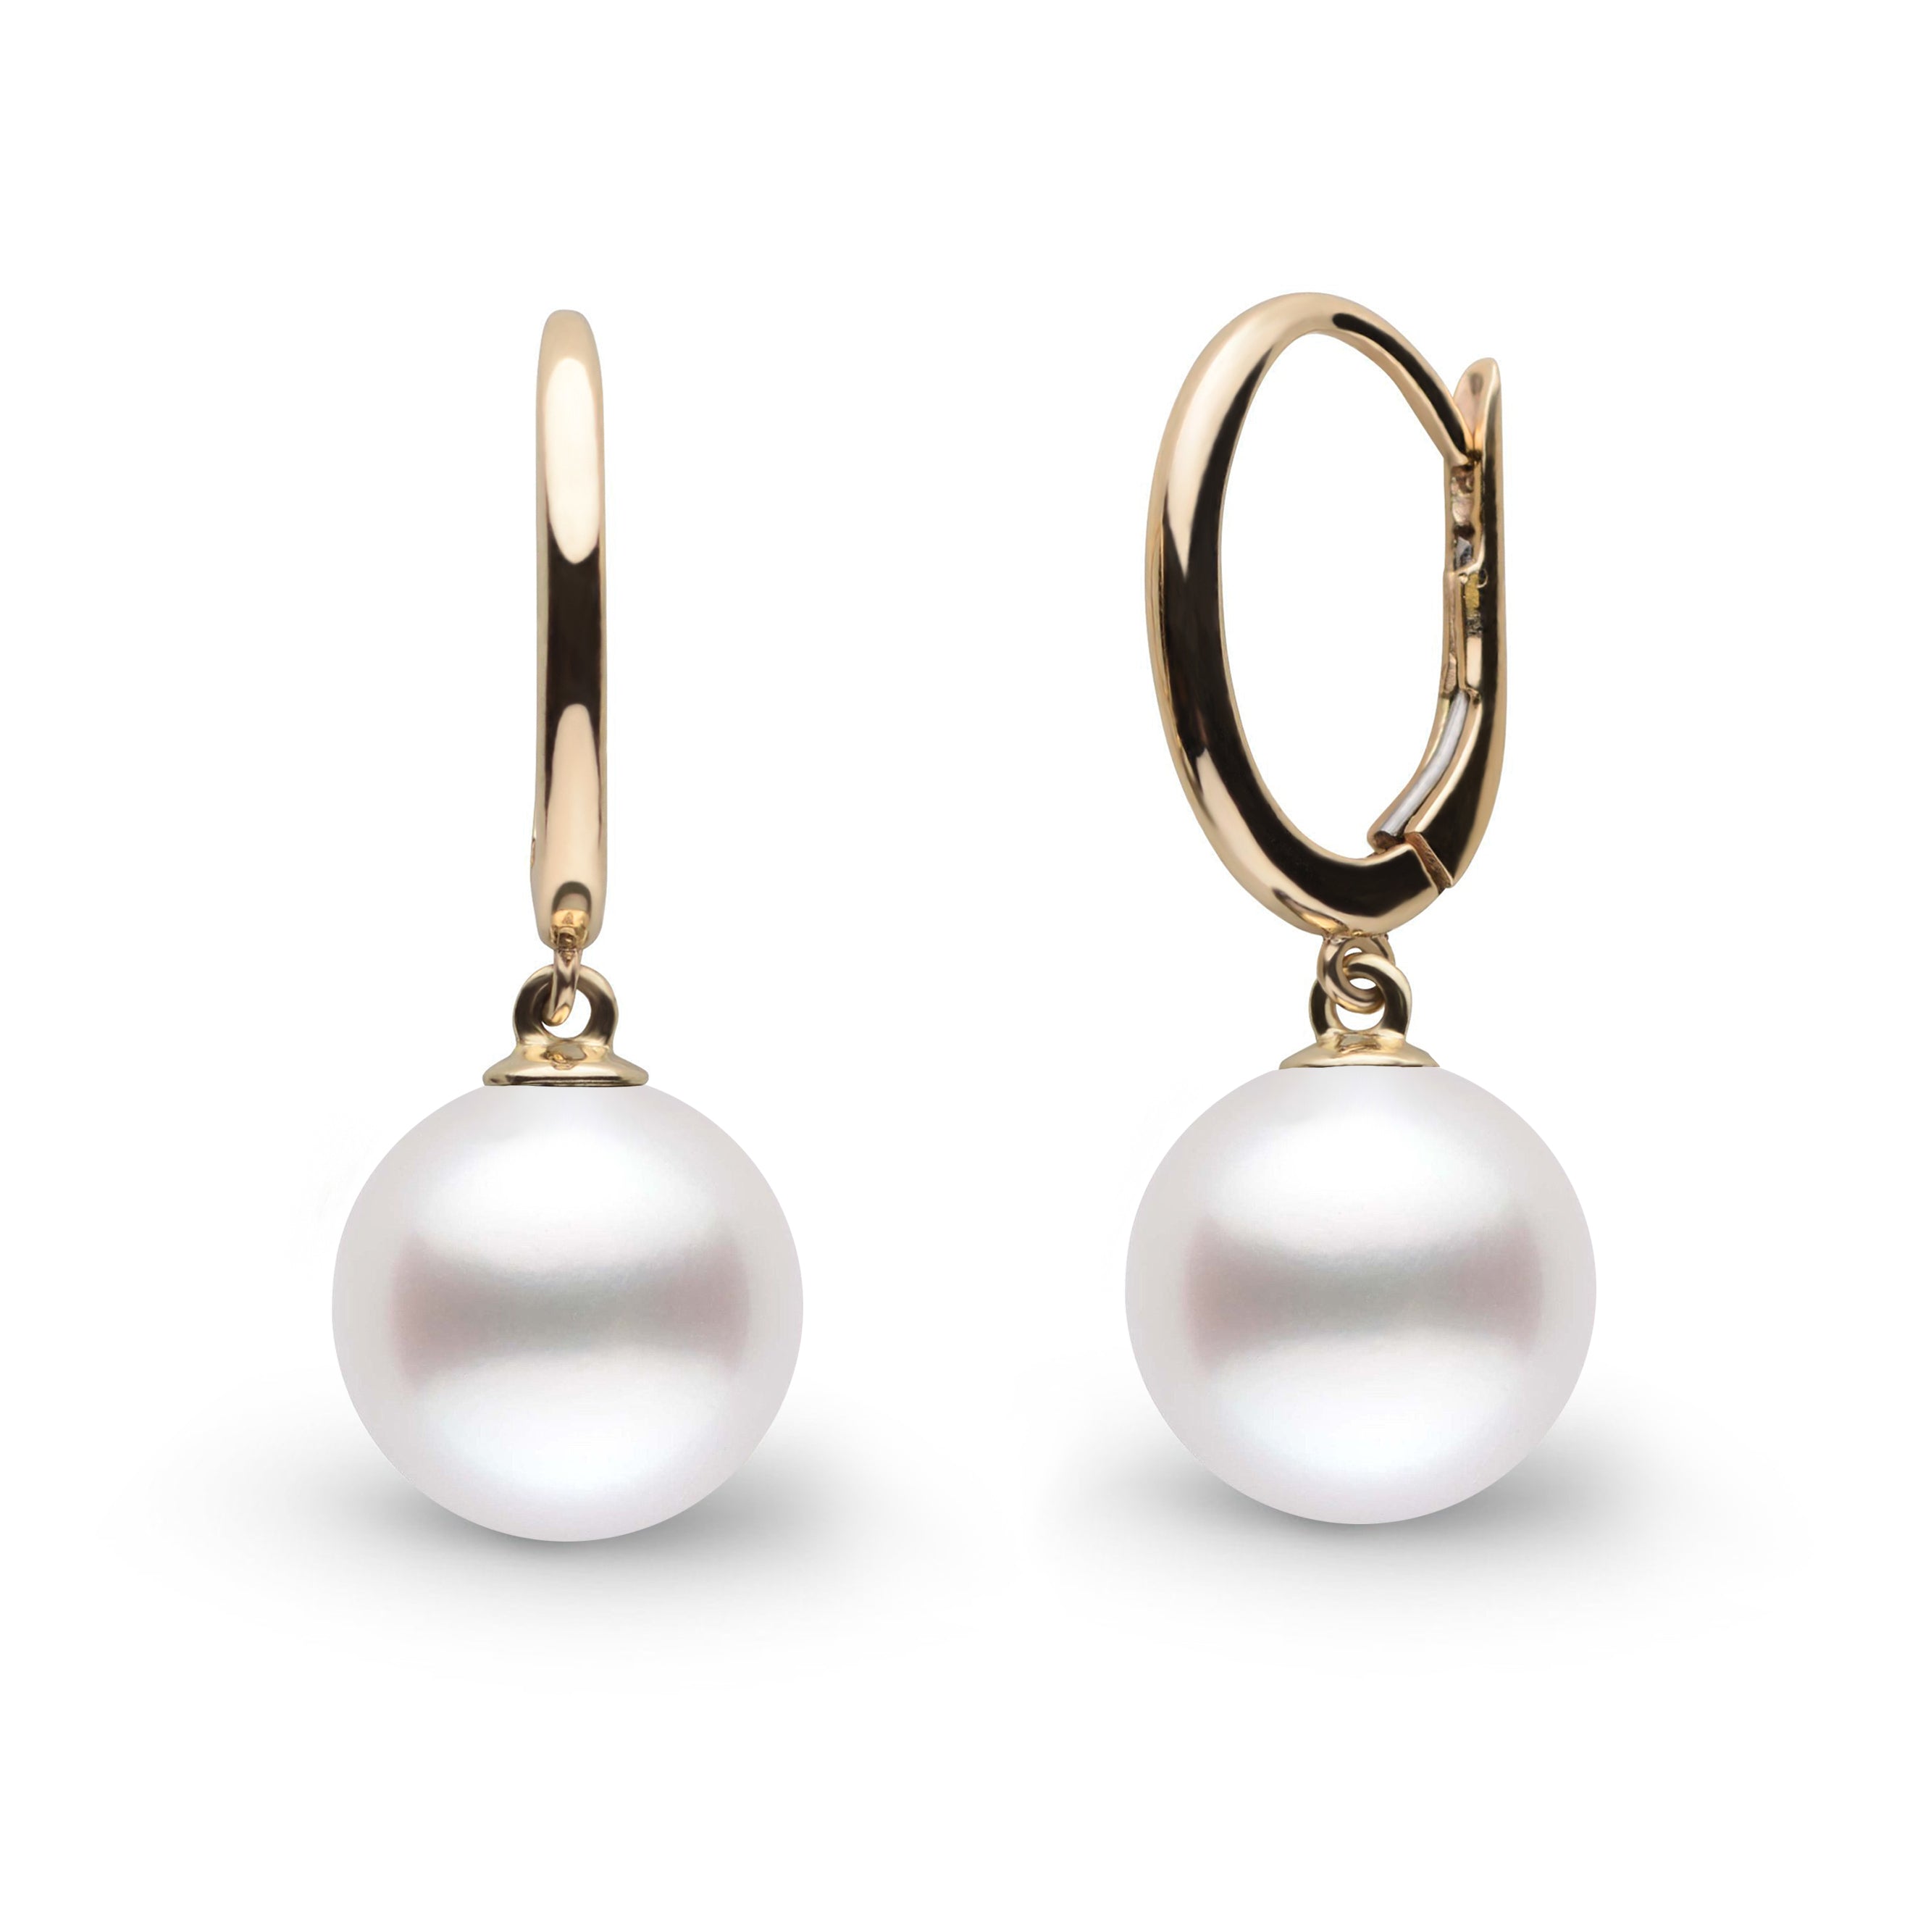 Solid Eternal Collection 9.0-10.0 mm White South Sea Pearl Earrings